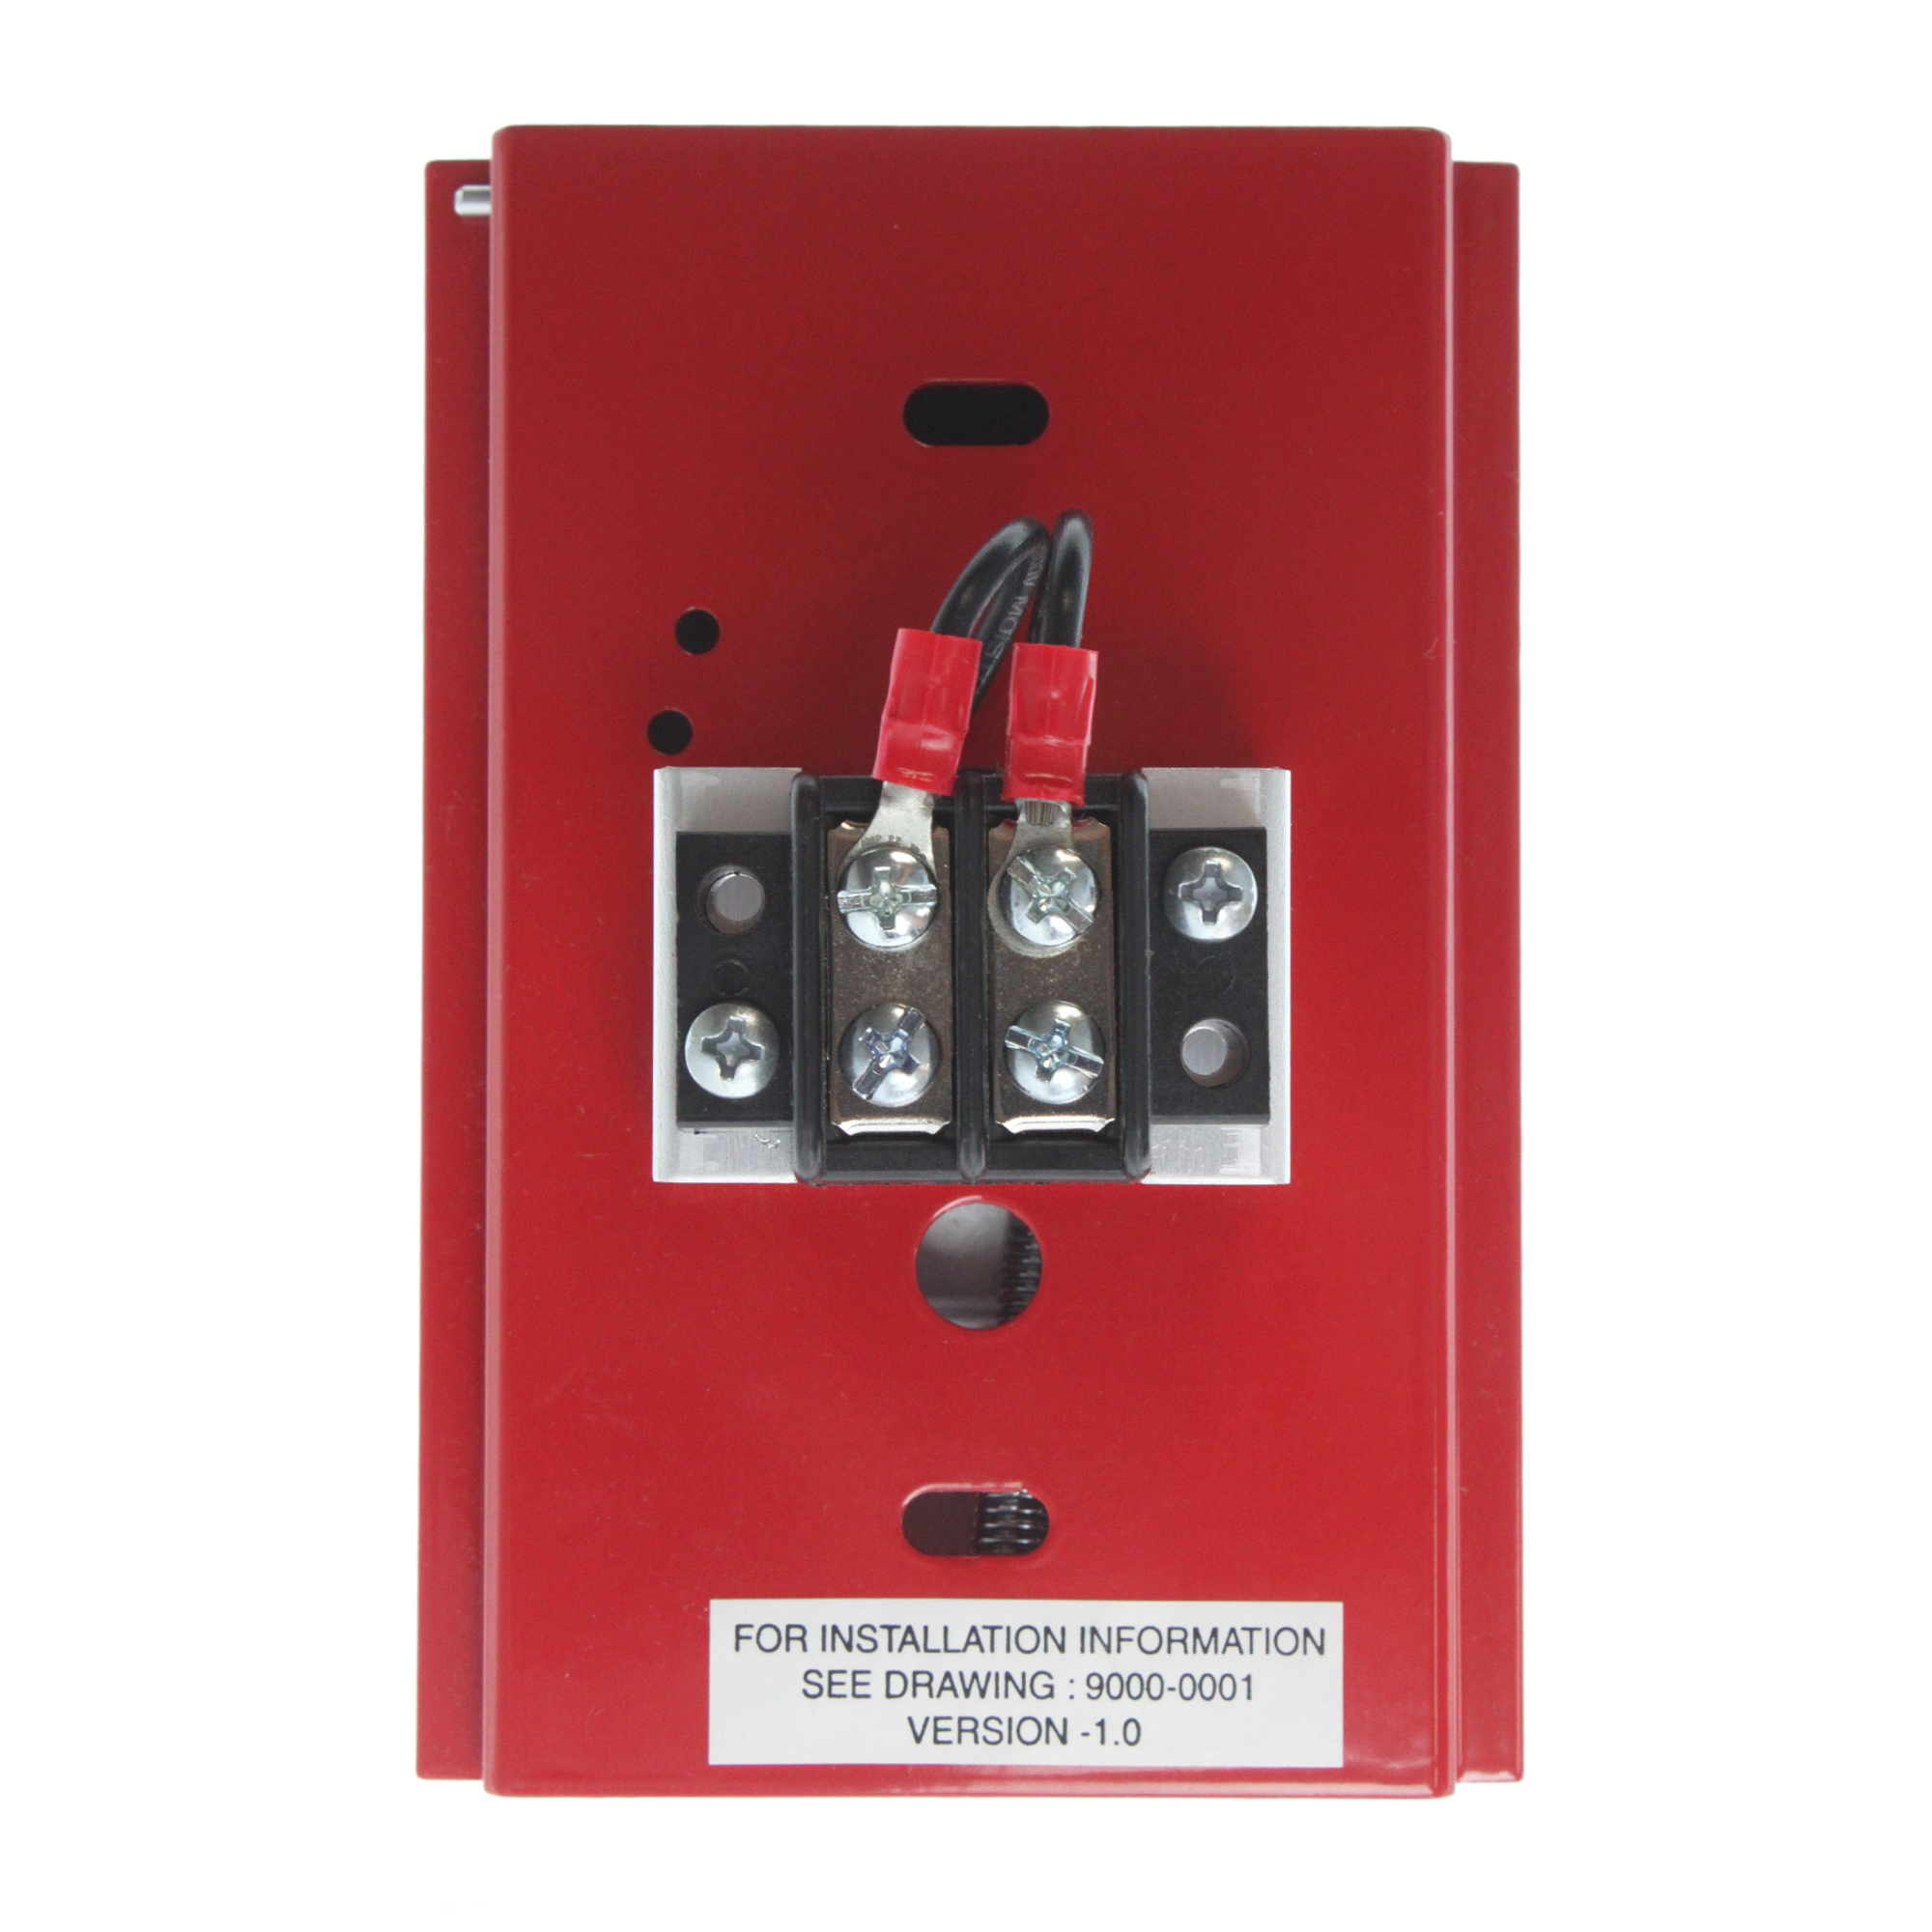 Gamewell-FCI MS-2 1100-0634 Dual-Action Manual Alarm Pull Station, Red - image 4 of 4